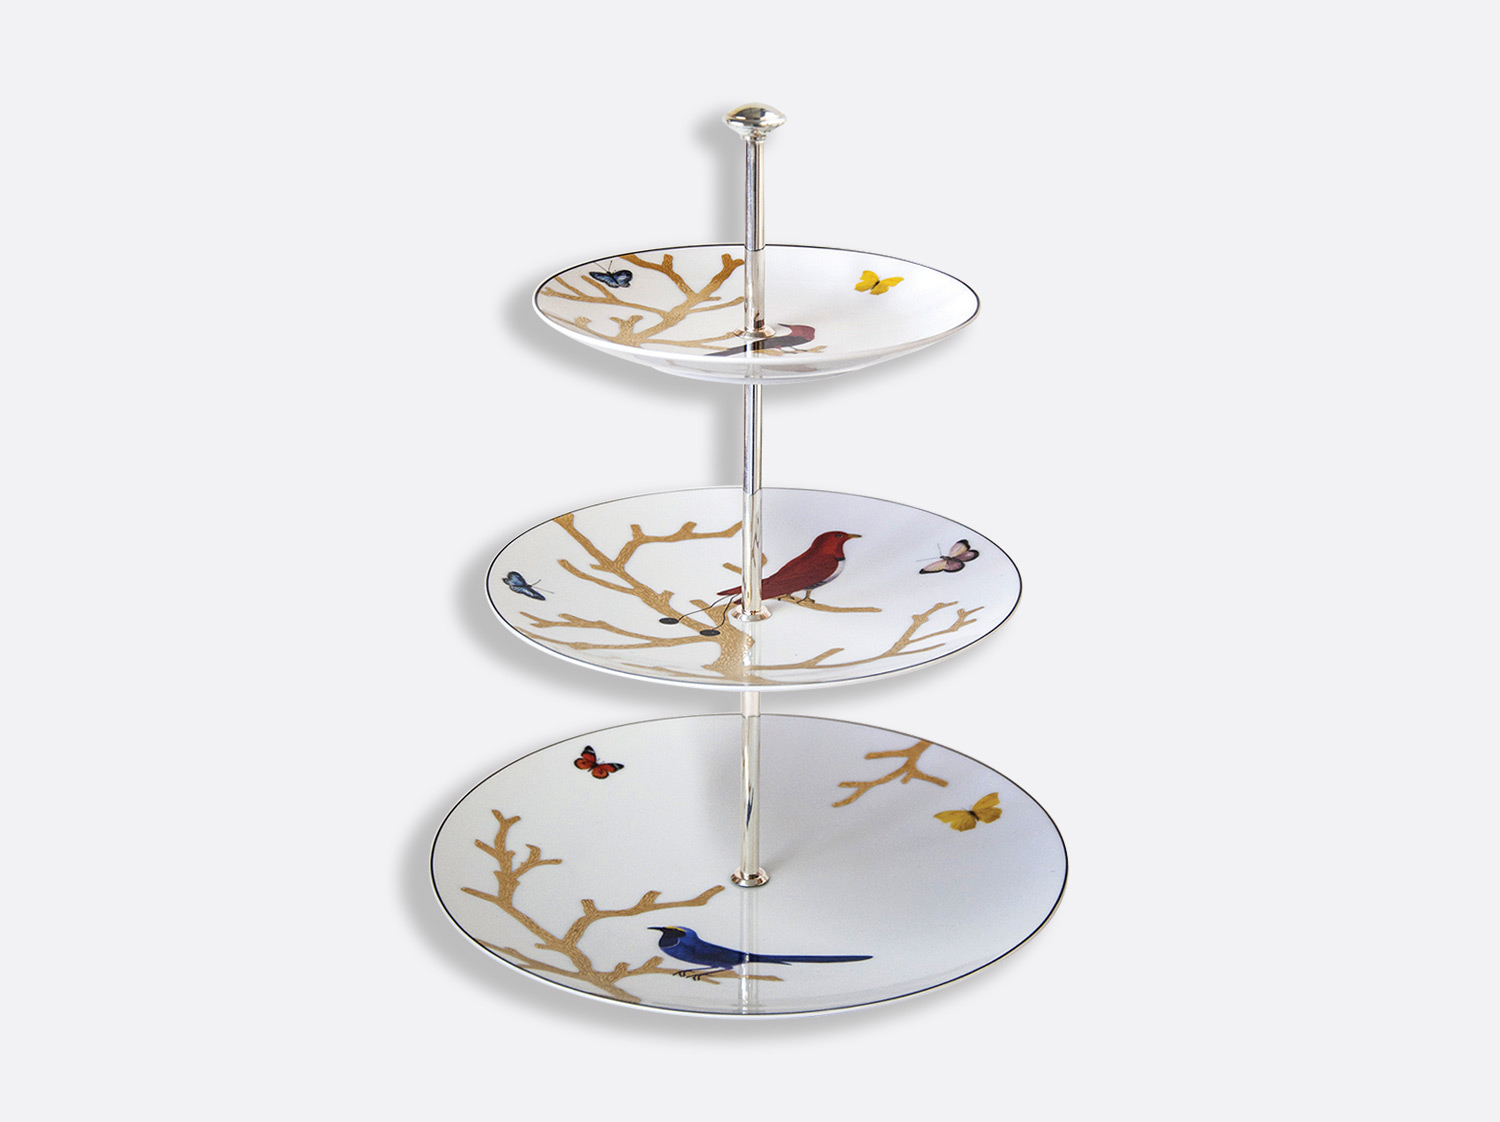 China 3-tier tray of the collection Aux oiseaux | Bernardaud